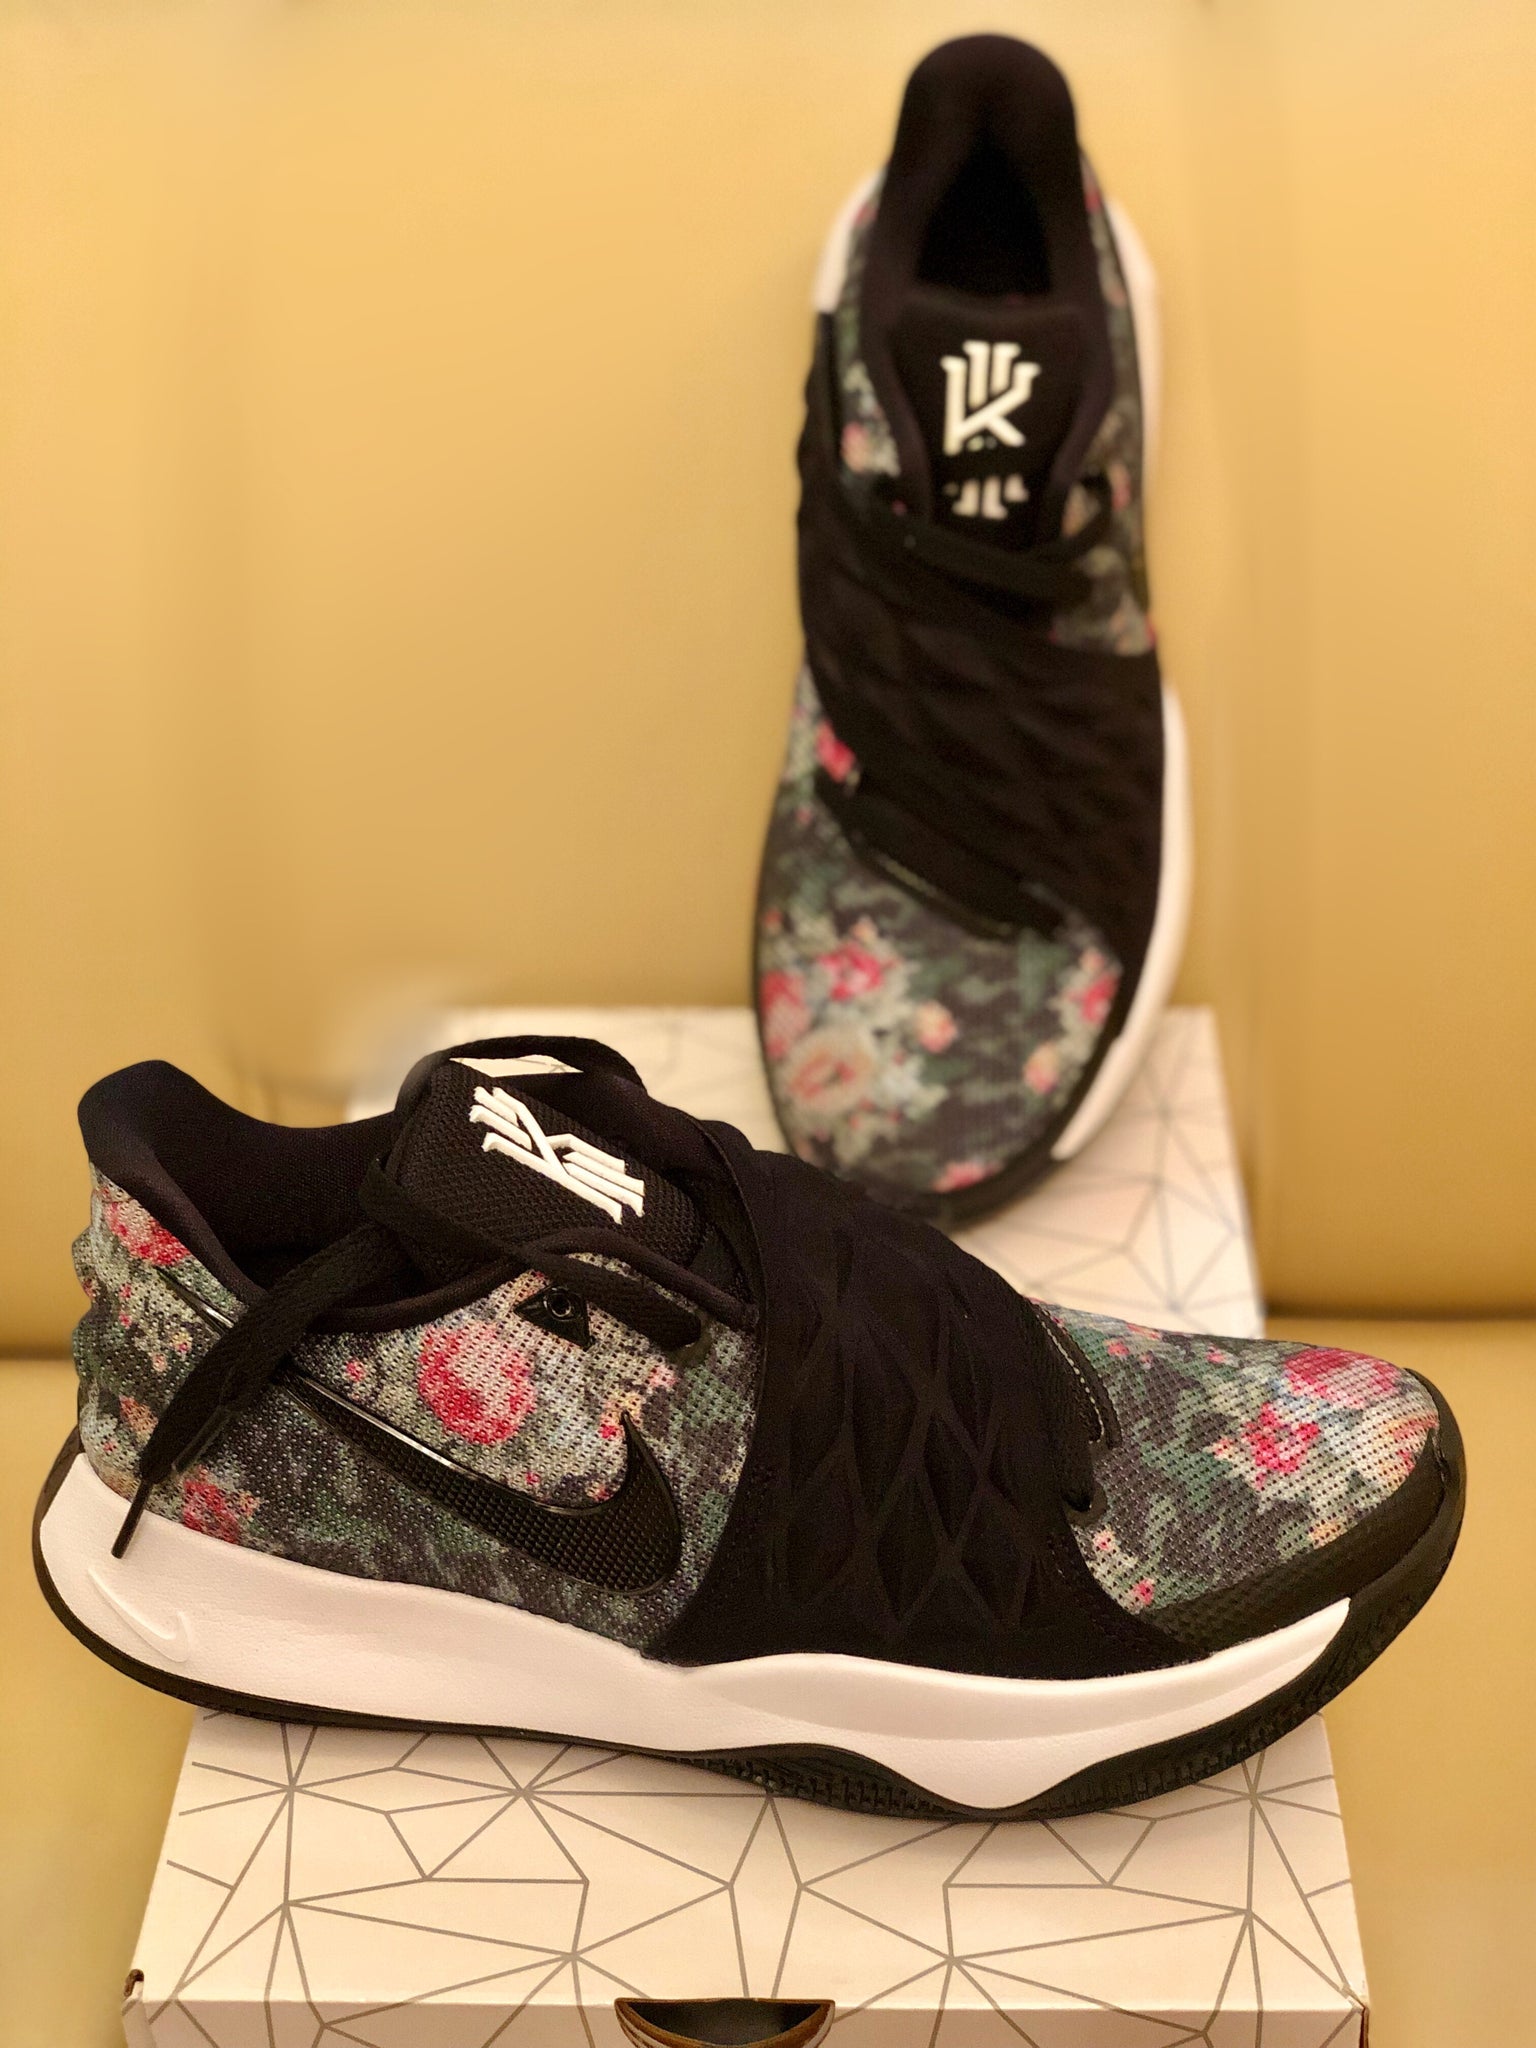 kyrie irving floral